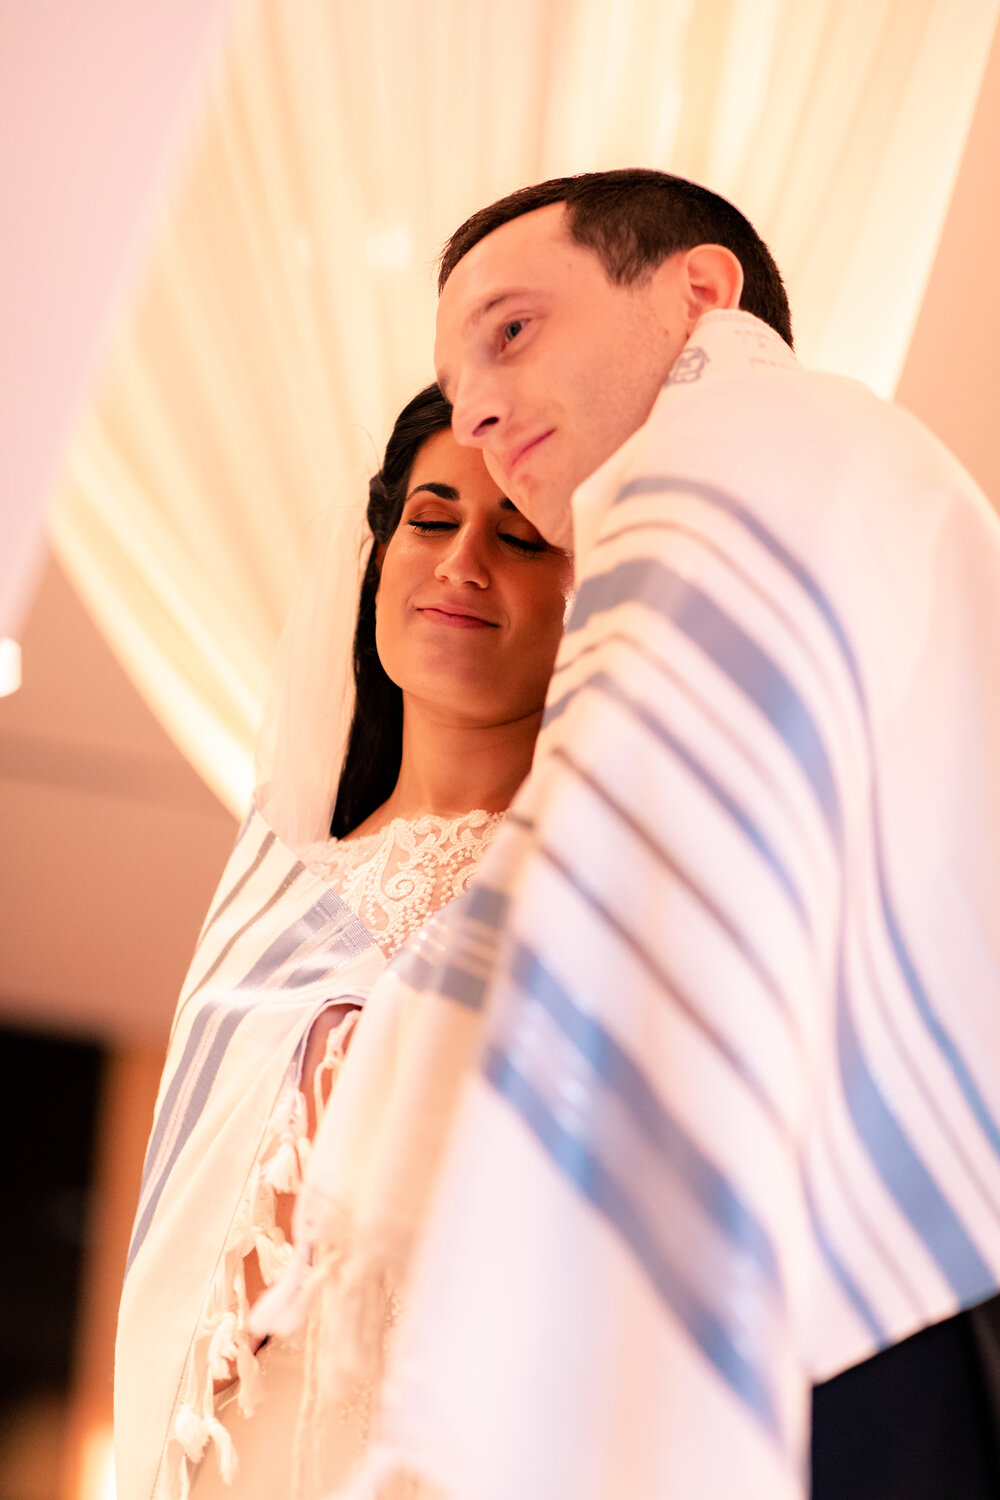 Bride and groom wrapped in Tallit at ceremony Sofitel Chicago wedding